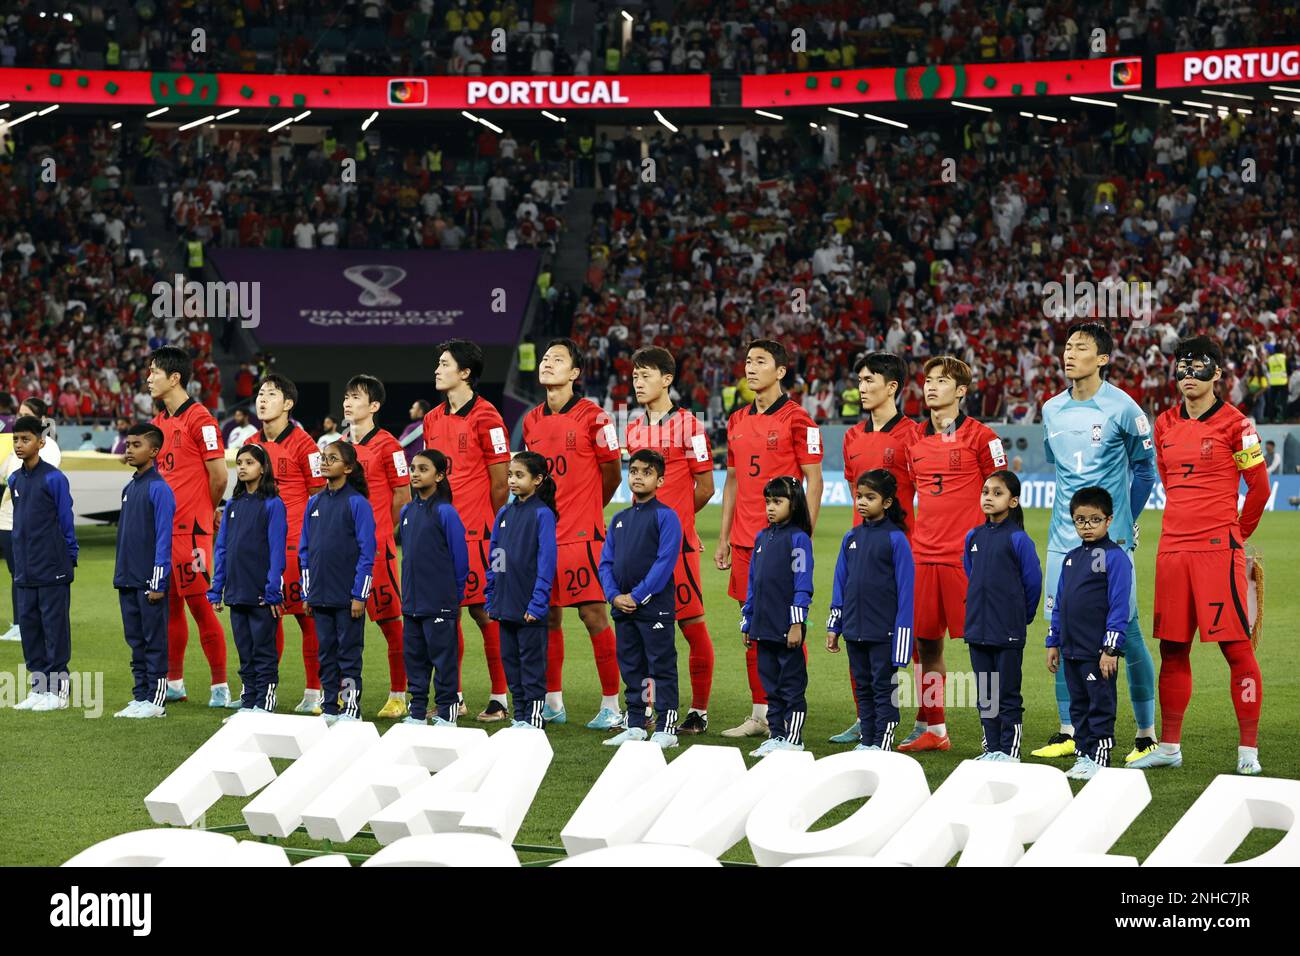 DOHA - (lr) Young-gwon Kim of Korea Republic, Kang-in Lee of Korea Republic, Moon-hwan Kim of Korea Republic, Gue-sung Cho of Korea Republic, Kyung-won Kwon of Korea Republic, Jae-sung Lee of Korea Republic, Woo-young Jung of Korea Republic, In-beom Hwang of Korea Republic, Jin-Su Kim of Korea Republic, Korea Republic goalkeeper Seung-Gyu Kim, Heung-min Son of Korea Republic during FIFA World Cup Qatar 2022 group H match between South Korea and Portugal at Education City Stadium on December 2, 2022 in Doha, Qatar. AP | Dutch Height | MAURICE OF STONE Stock Photo